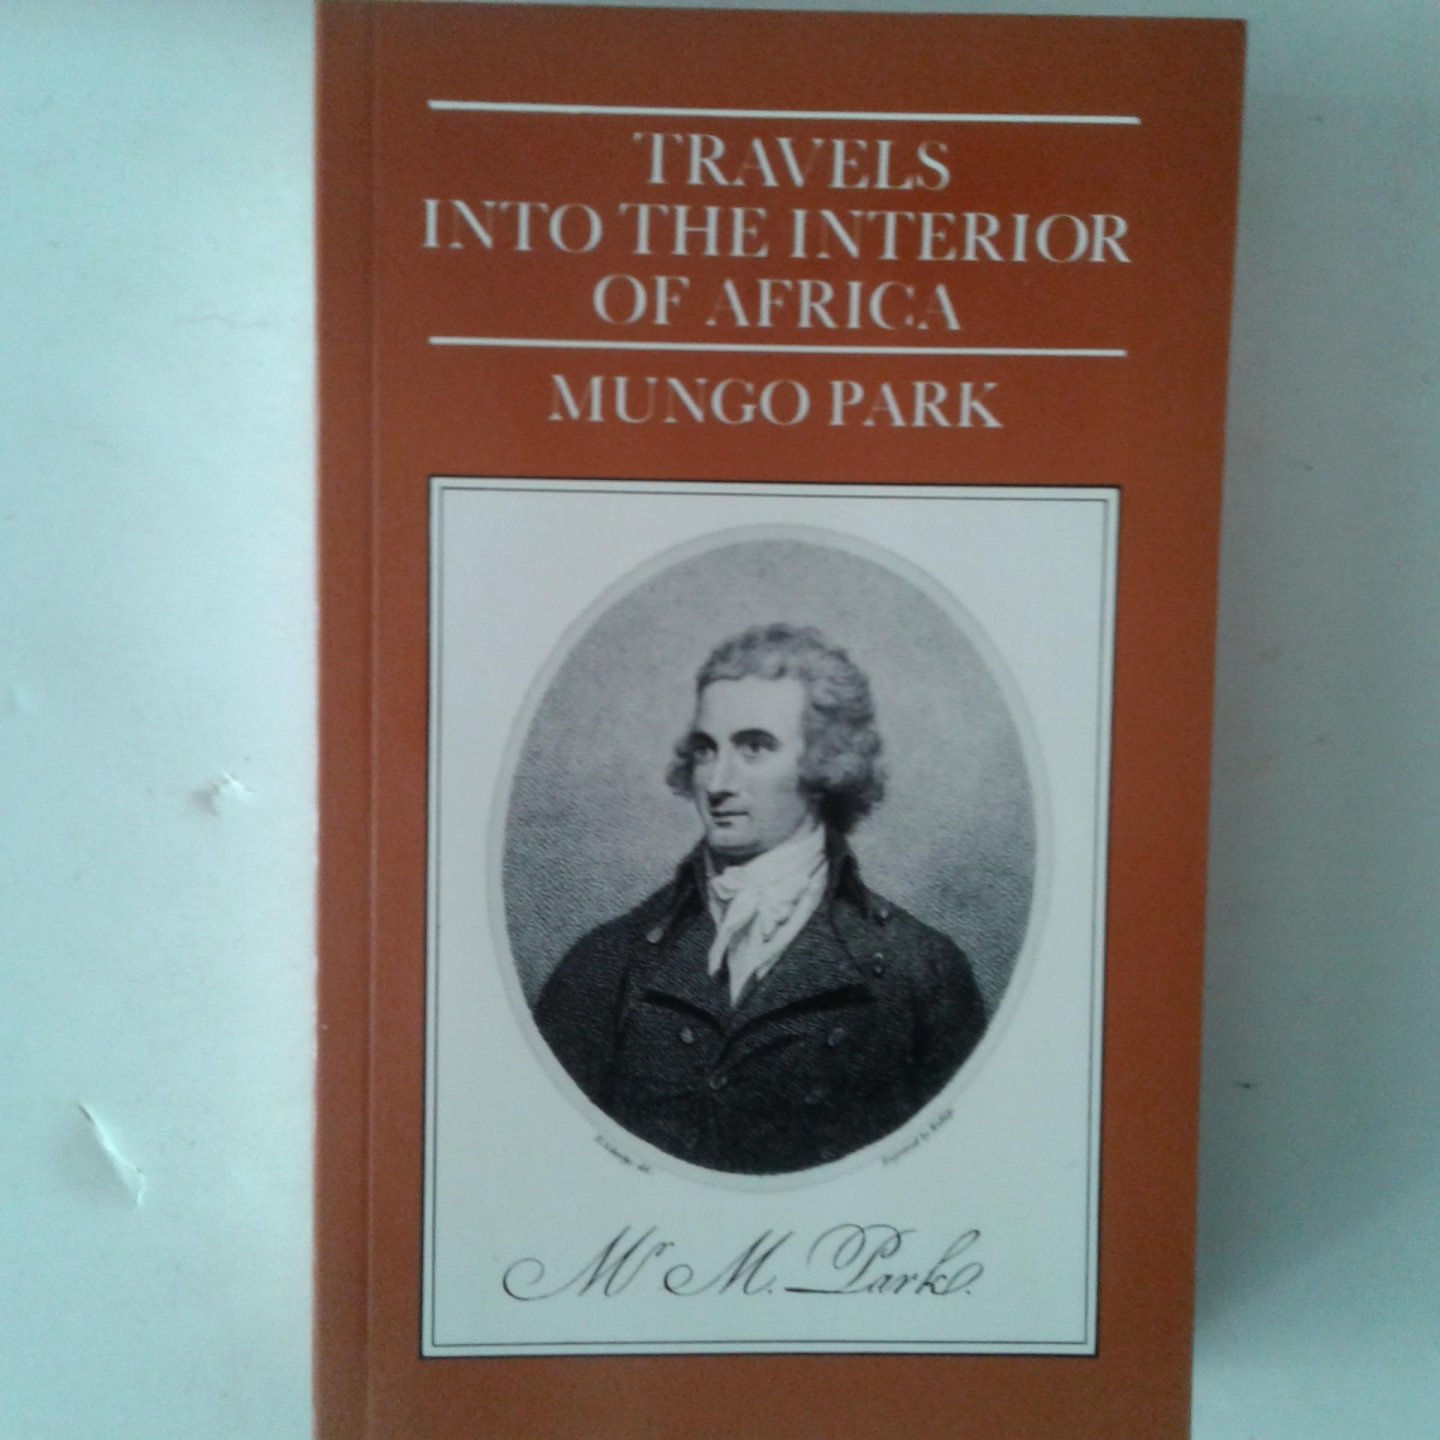 Park, Mungo - Travels into the Interior of Africa